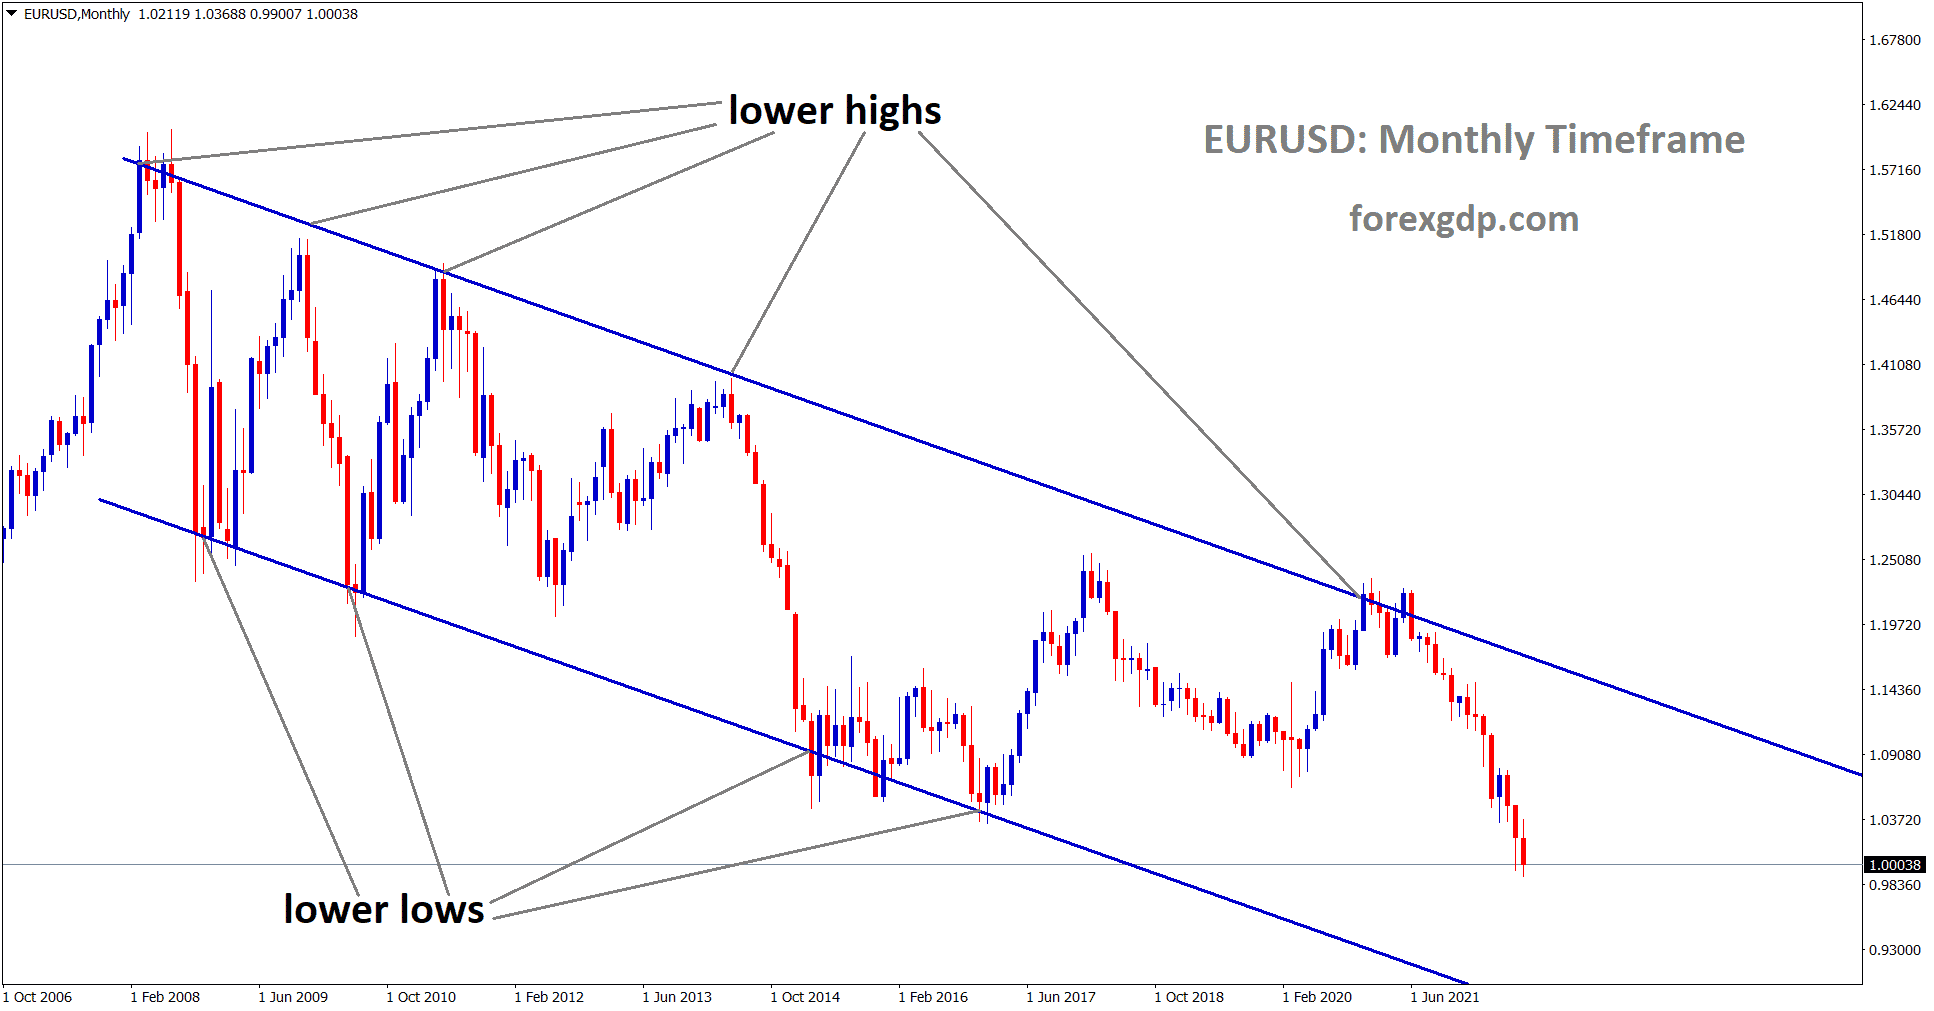 EURUSD is moving in the Descending channel and the Market has fallen from the Lower high area of the channel.